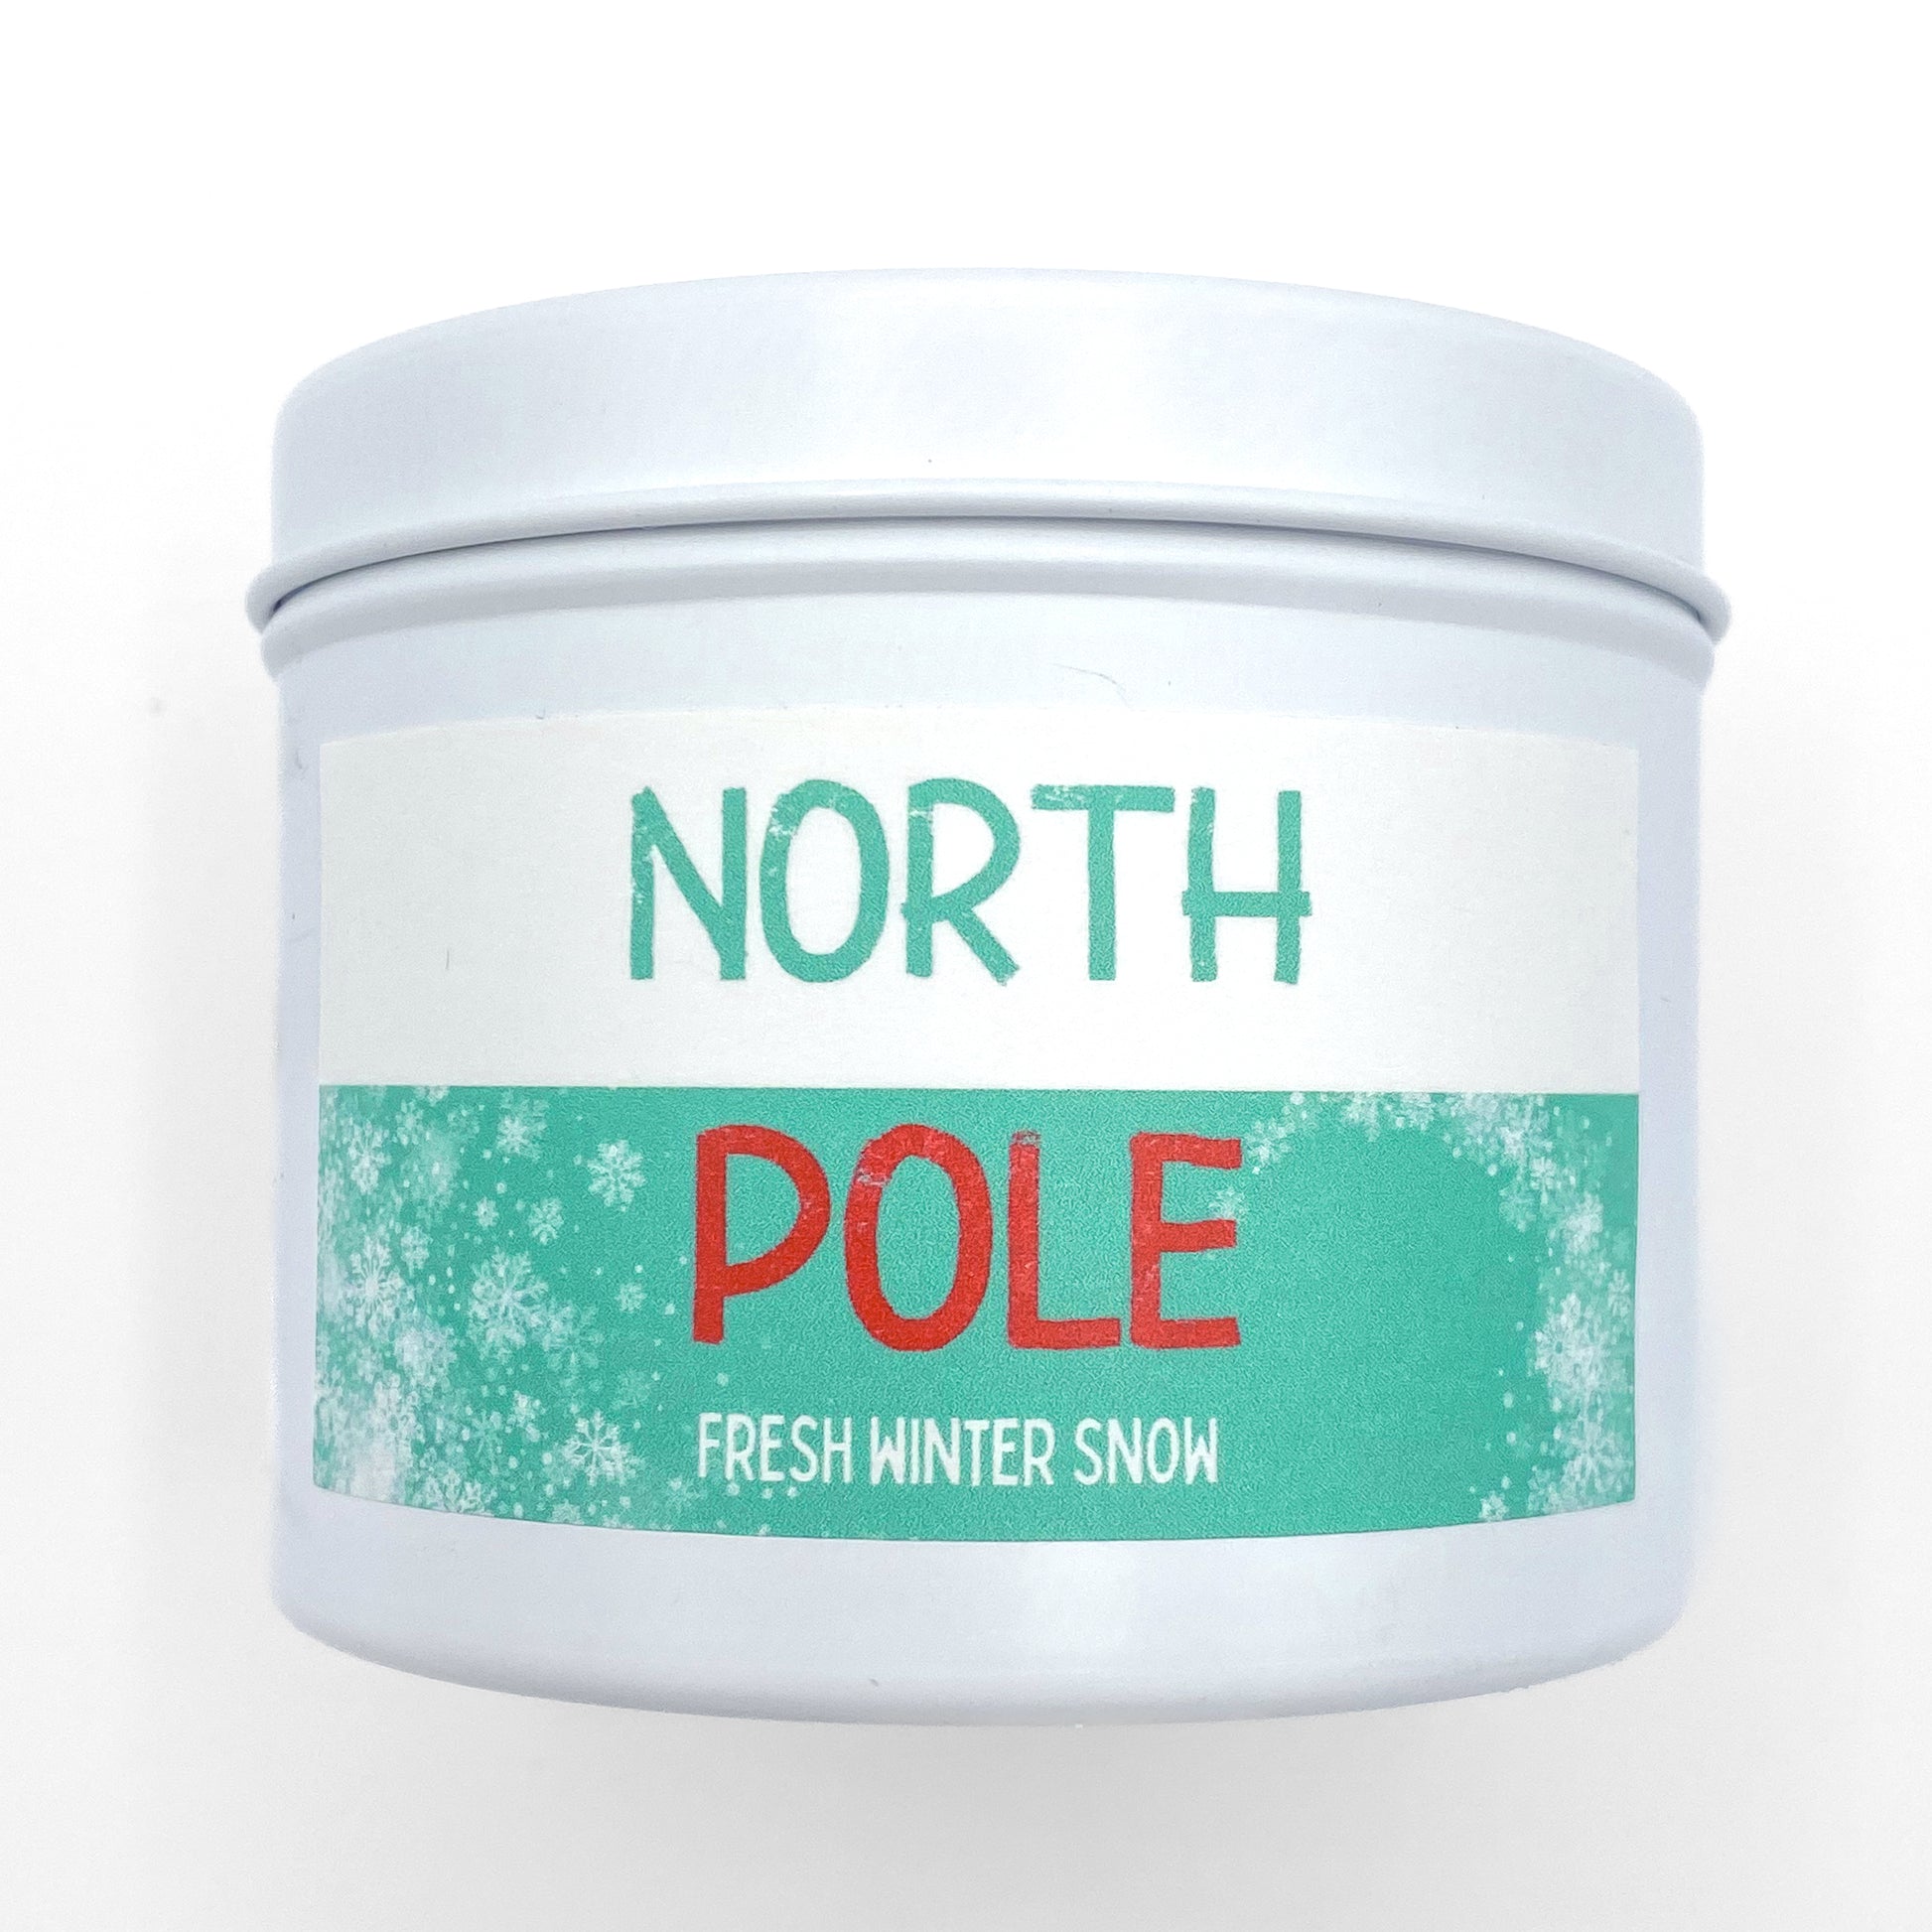 "North Pole" holiday candle in decorative white tin